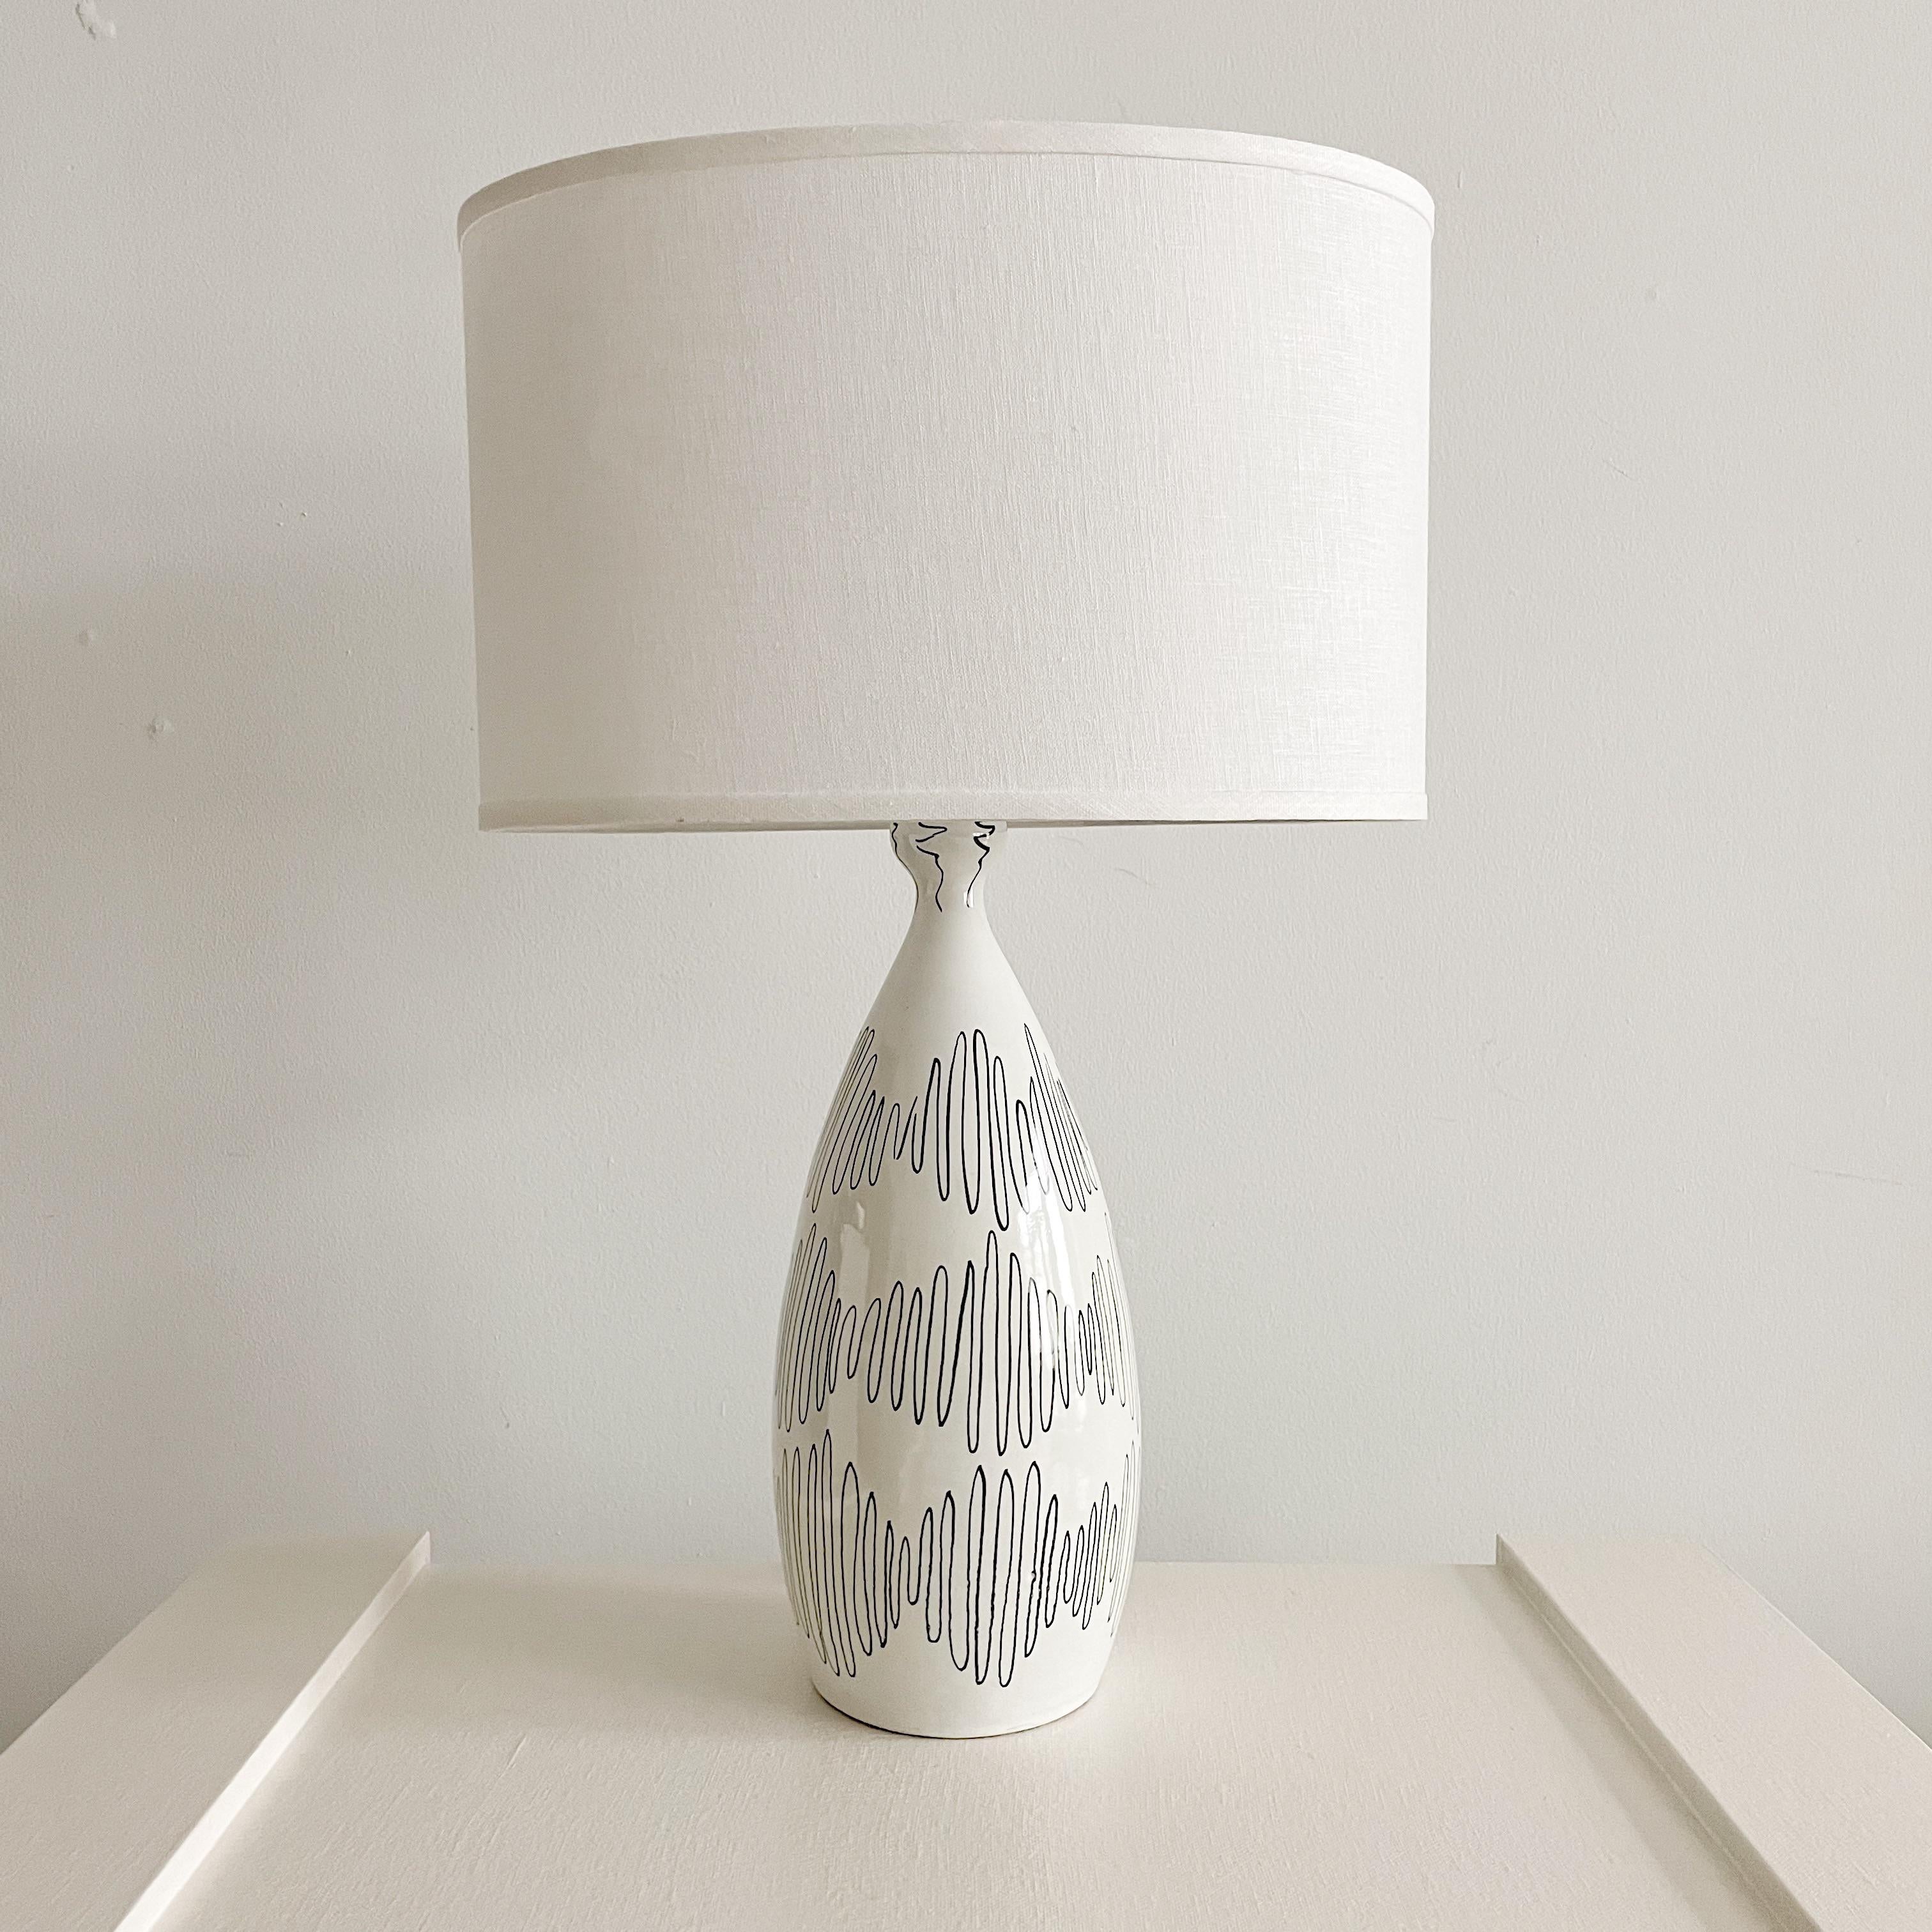 Hand-Painted Raymor Vintage Black & White Ceramic Table Lamp For Sale